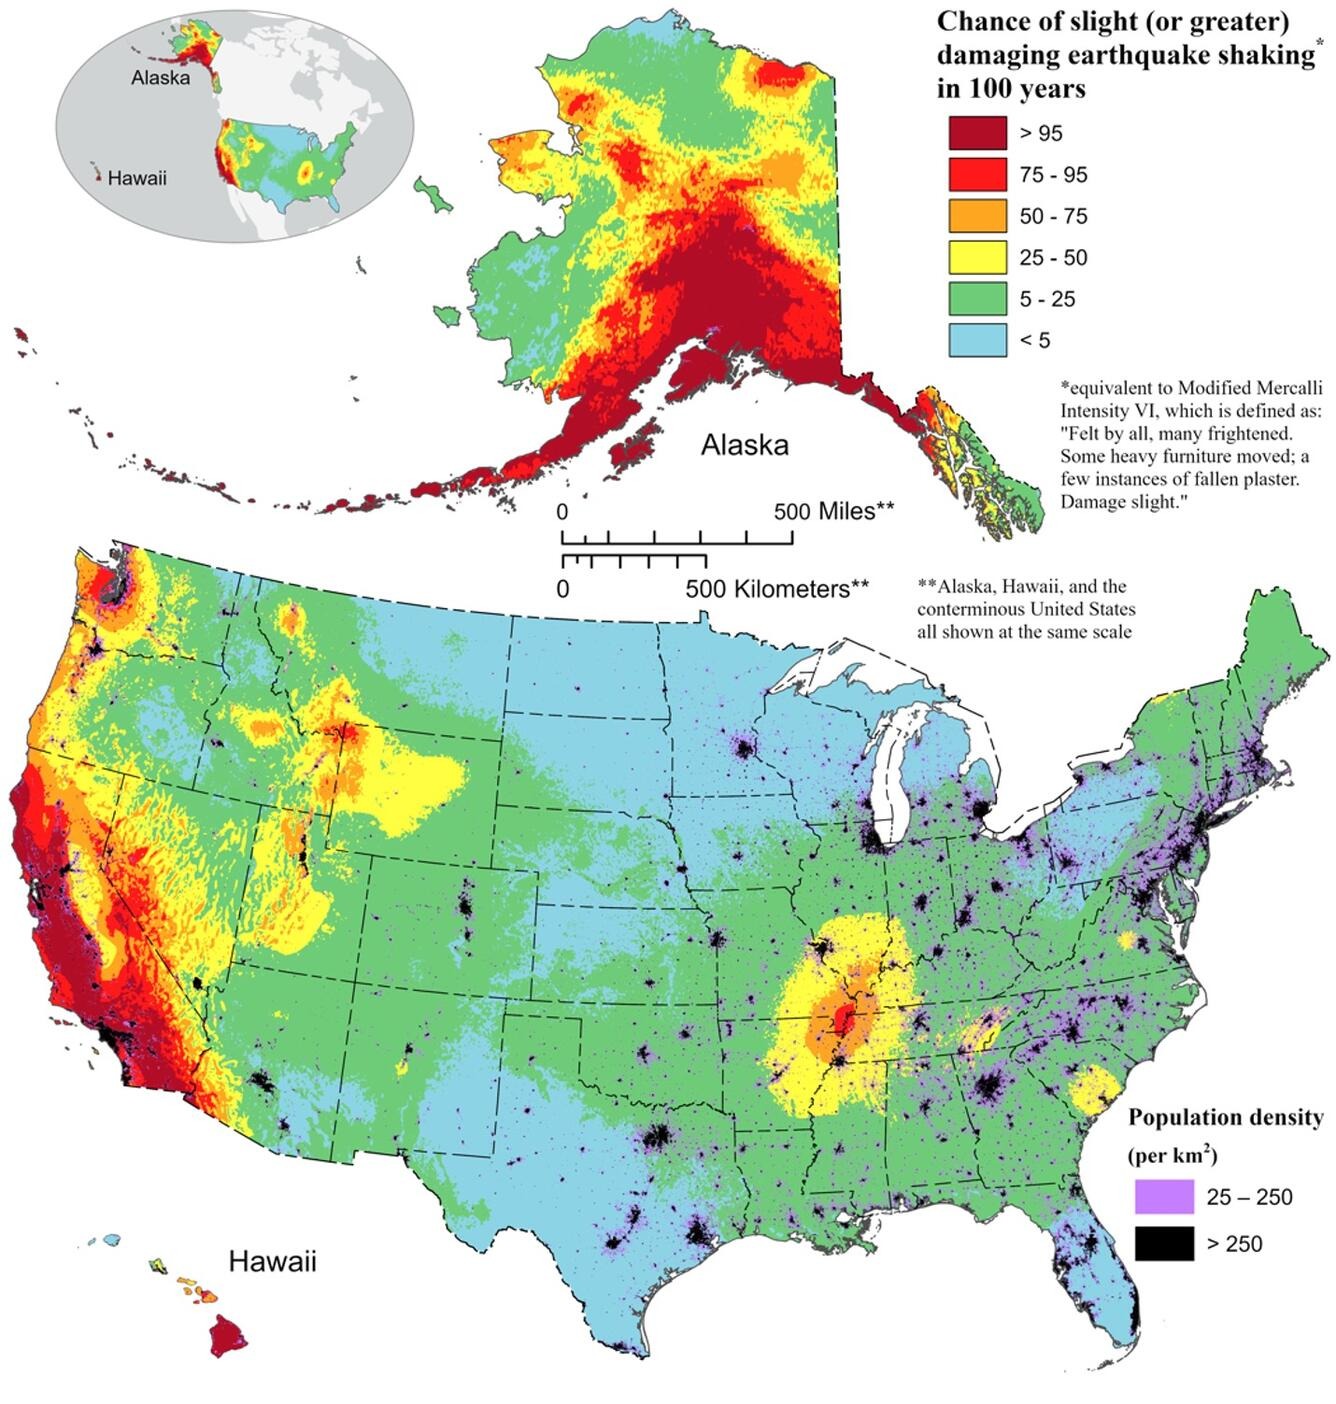 California, Alaska and Hawaii, with 95% to record a large earthquake: according to a new map from the United States Geological Survey